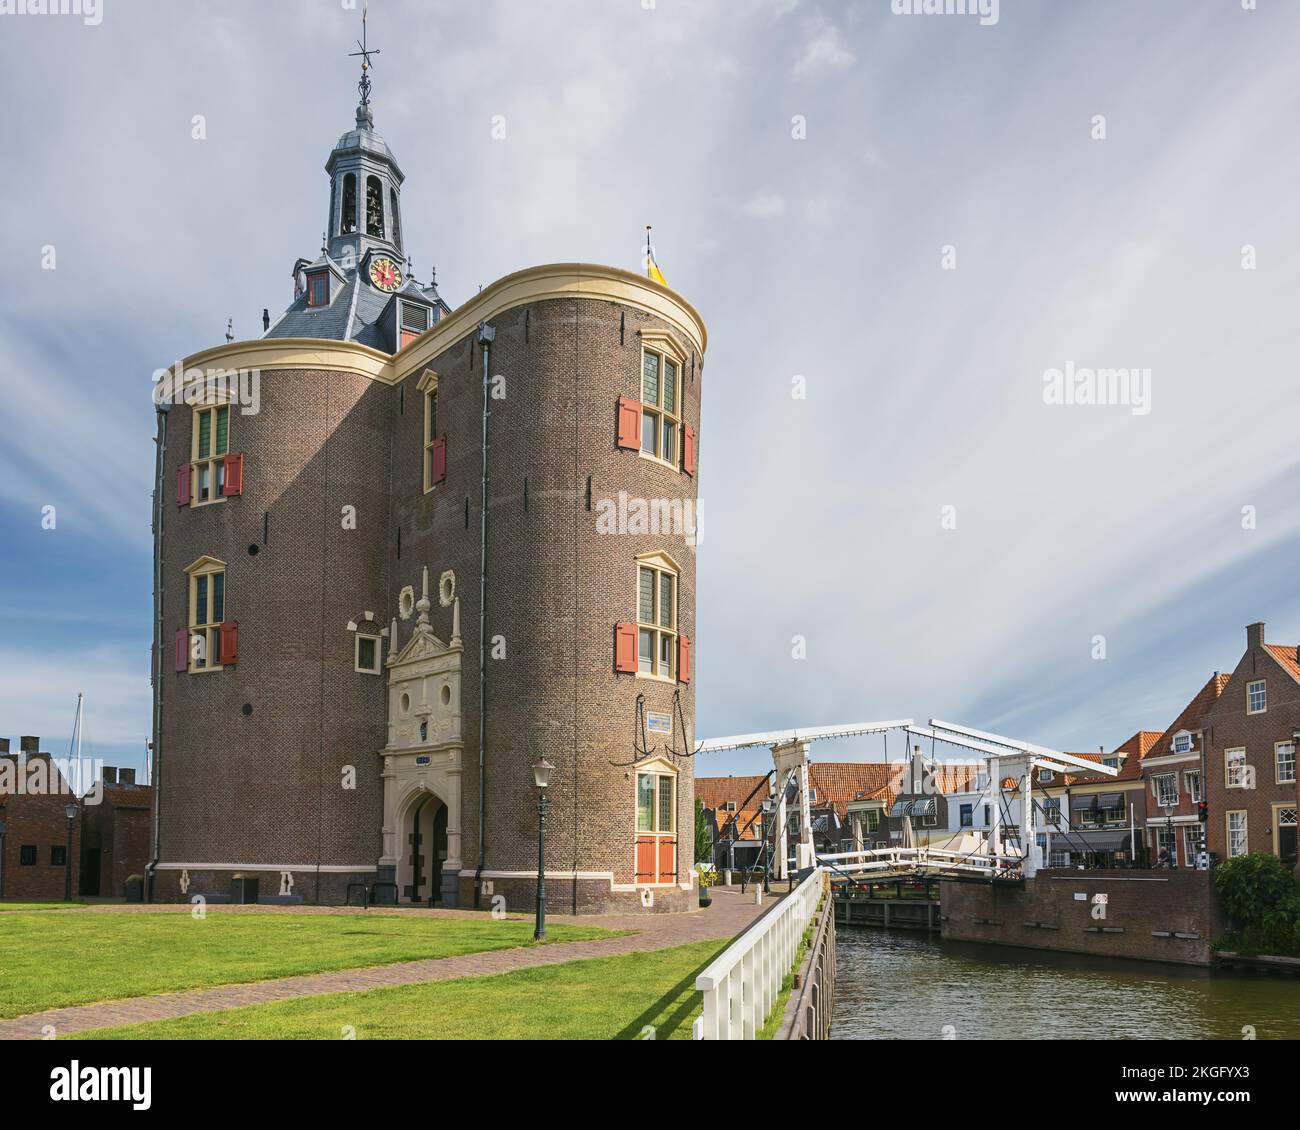 Editorial: ENKHUIZEN, NORTH HOLLAND, NETHERLANDS, JULY 12, 2022 - The Drommedaris gate and its surroundings an historic gate to enter Enkhuizen Stock Photo